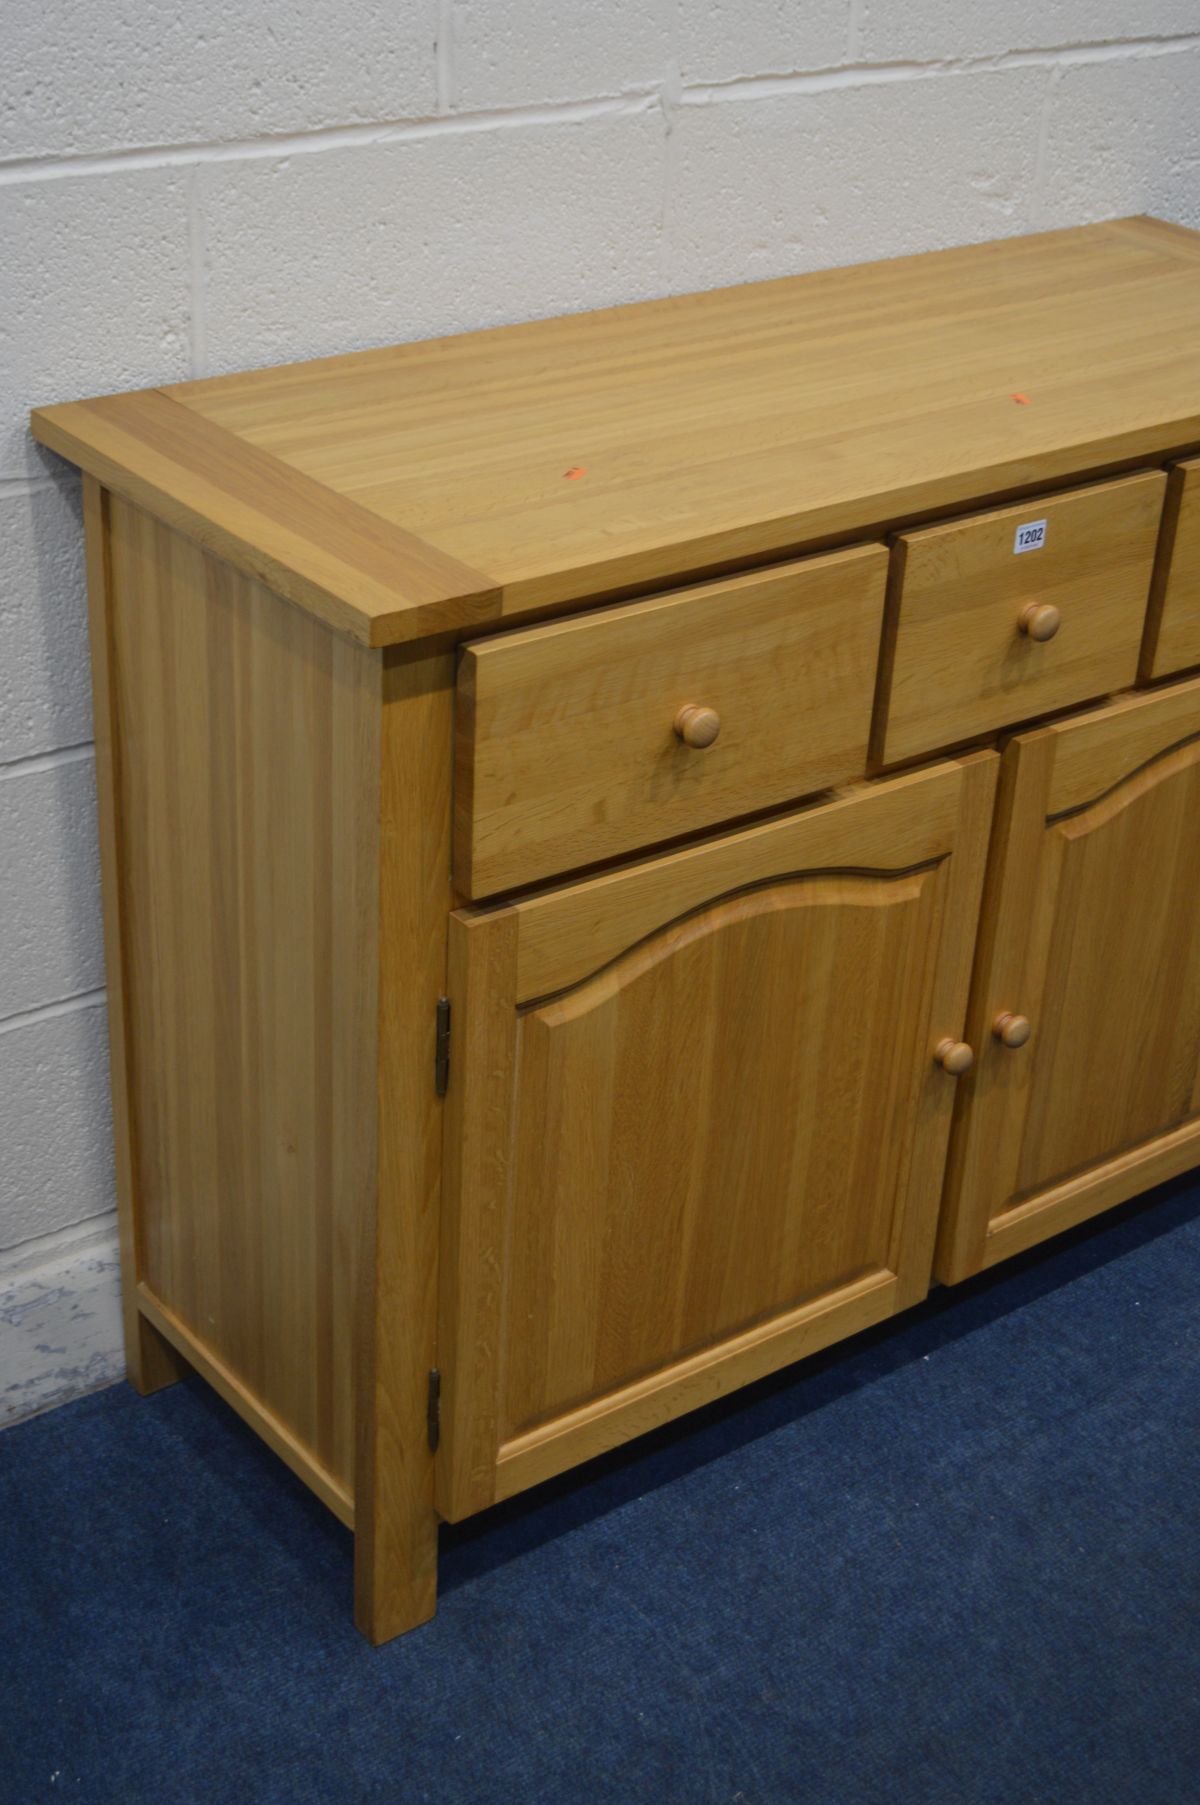 A SOLID LIGHT OAK SIDEBOARD, with three drawers, width 120cm x depth 45cm x height 90cm - Image 2 of 2